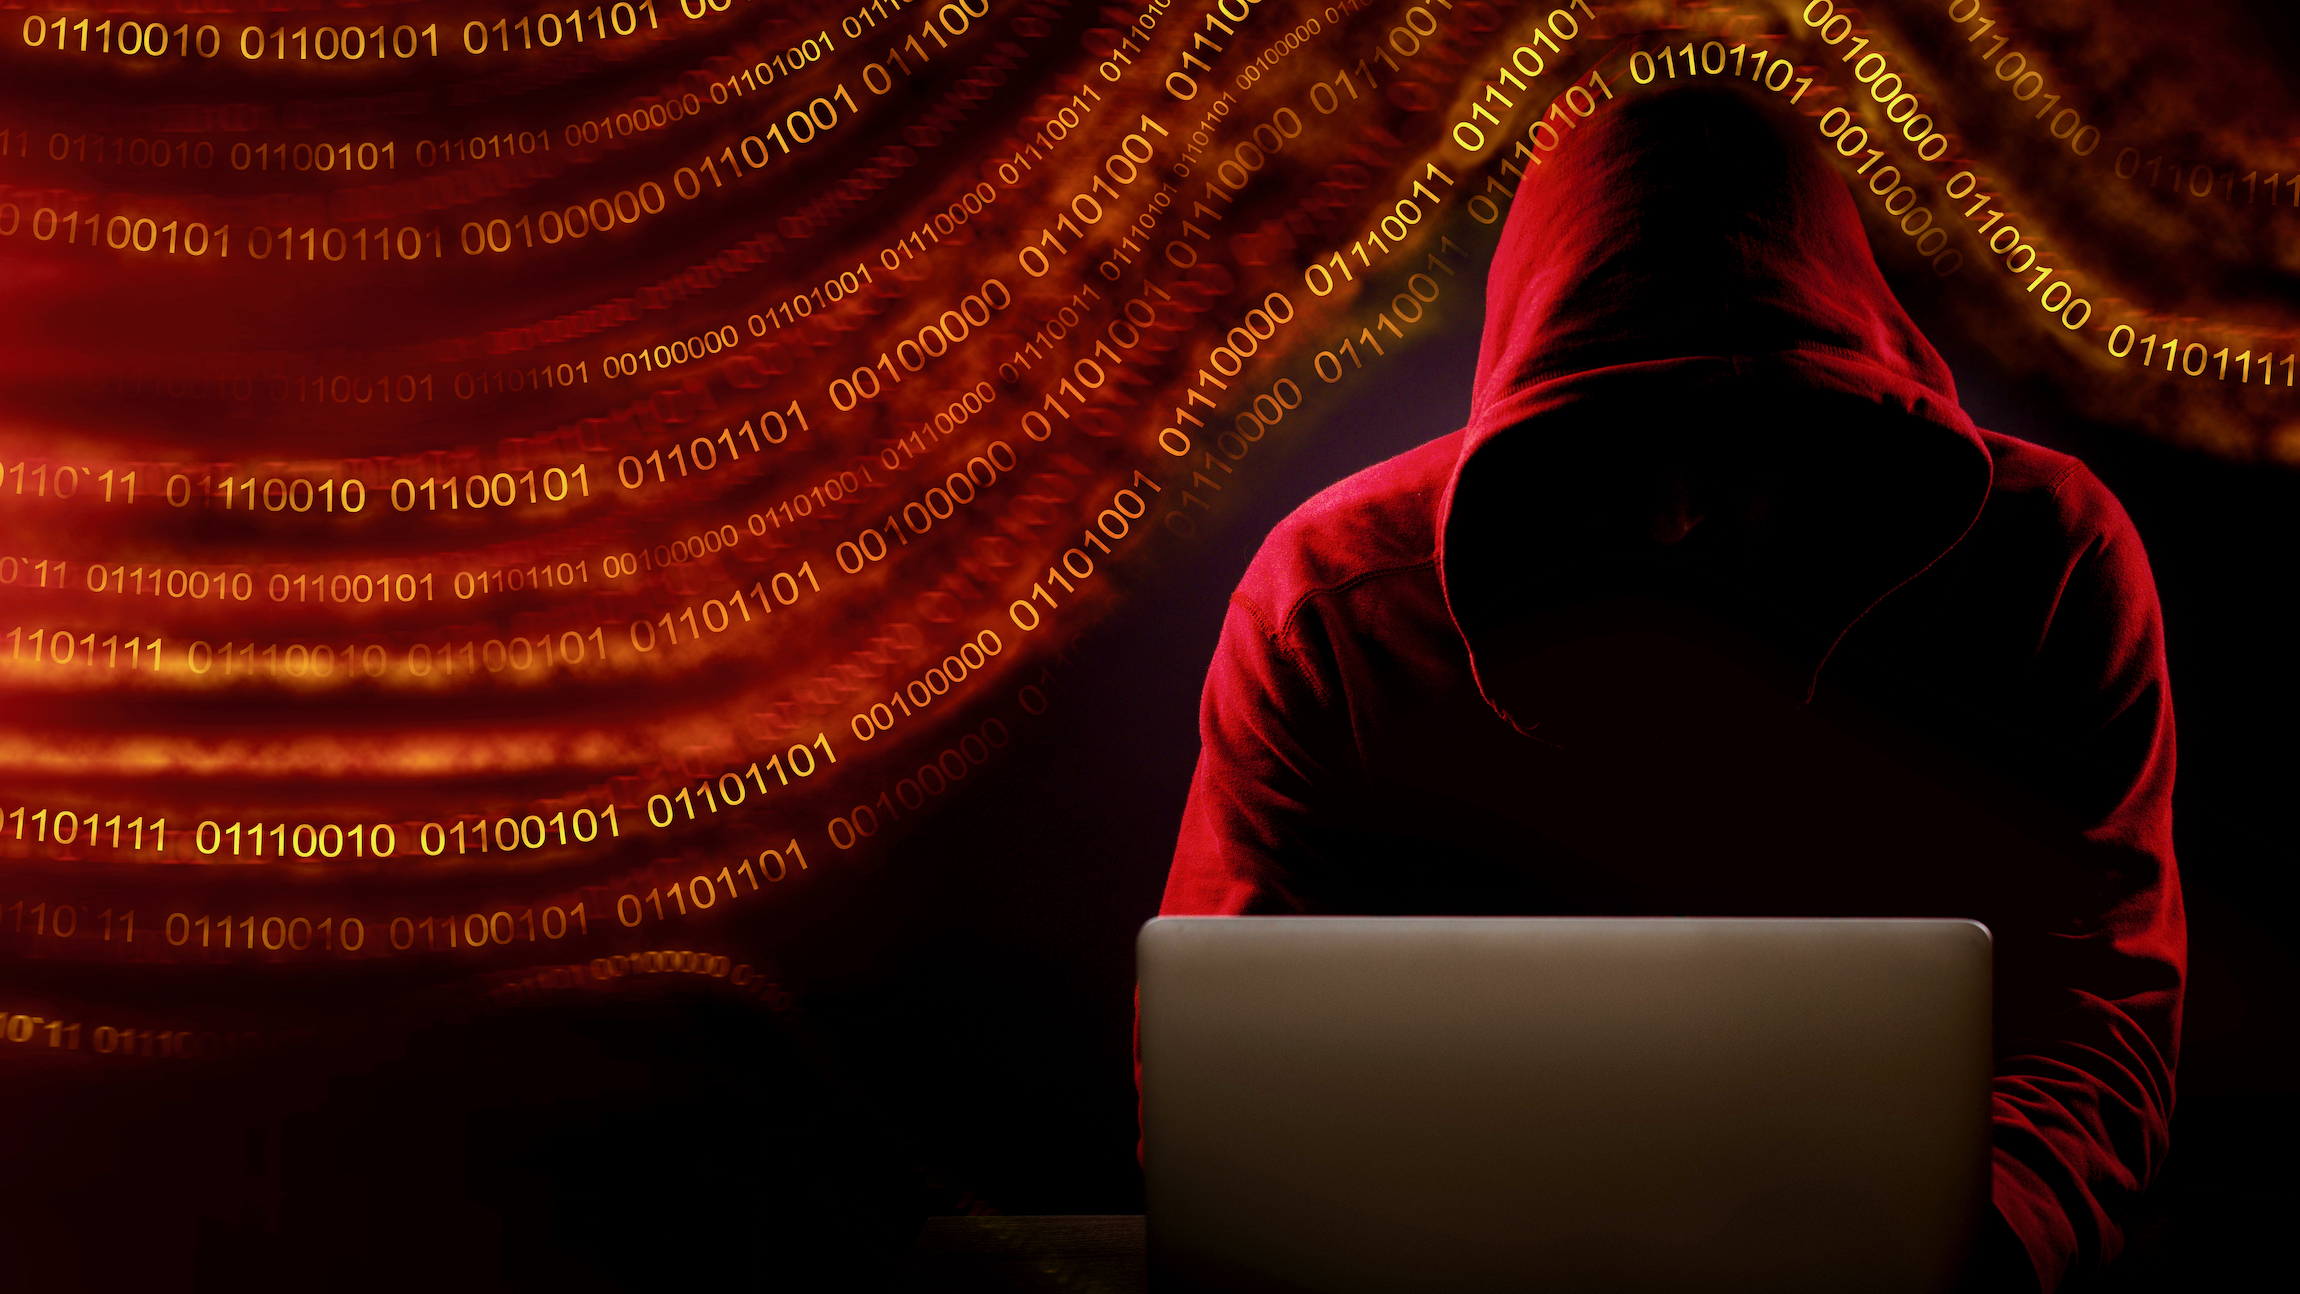 A illustration of a man in a hooded sweatshirt, representing a hacker,behind a laptop, illustrating the cybersecurity risks the transport sector